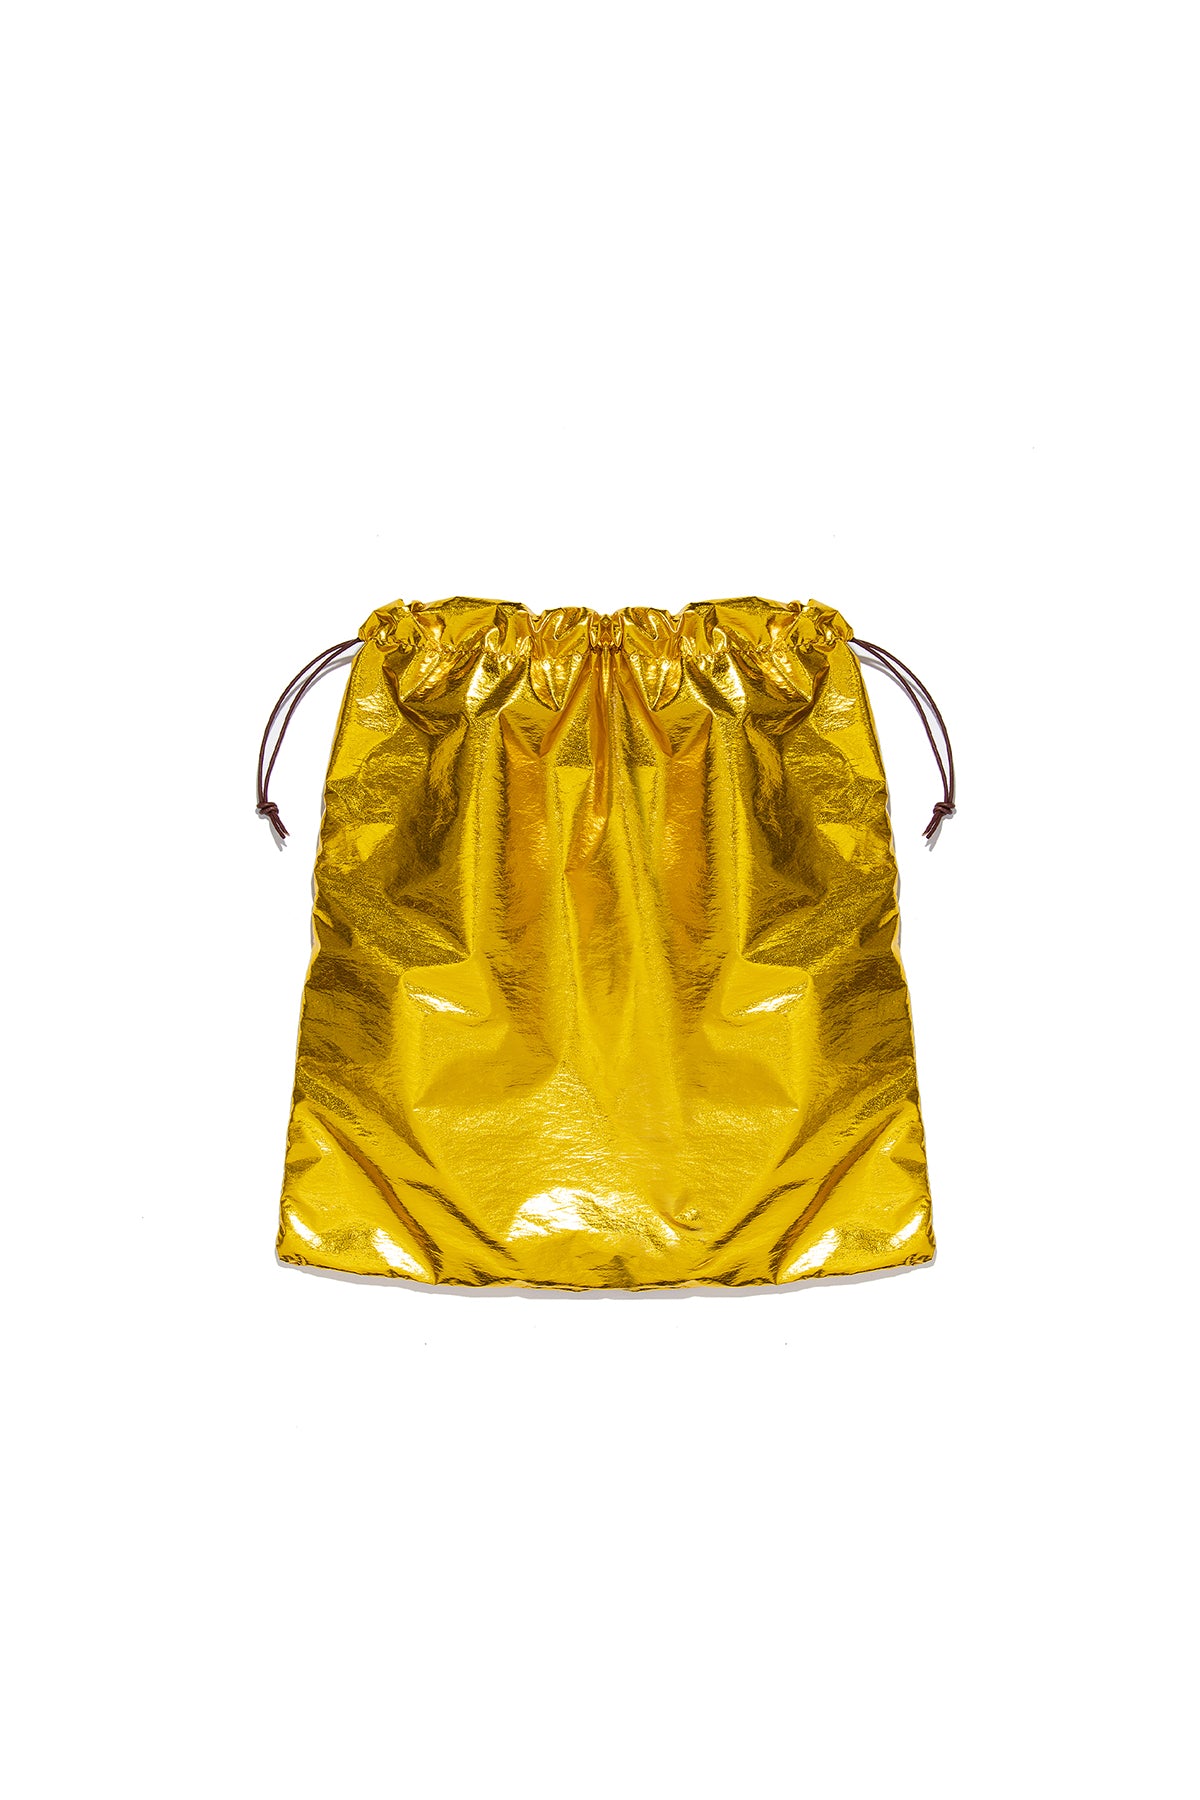 Large Metallic Pouch - Gold